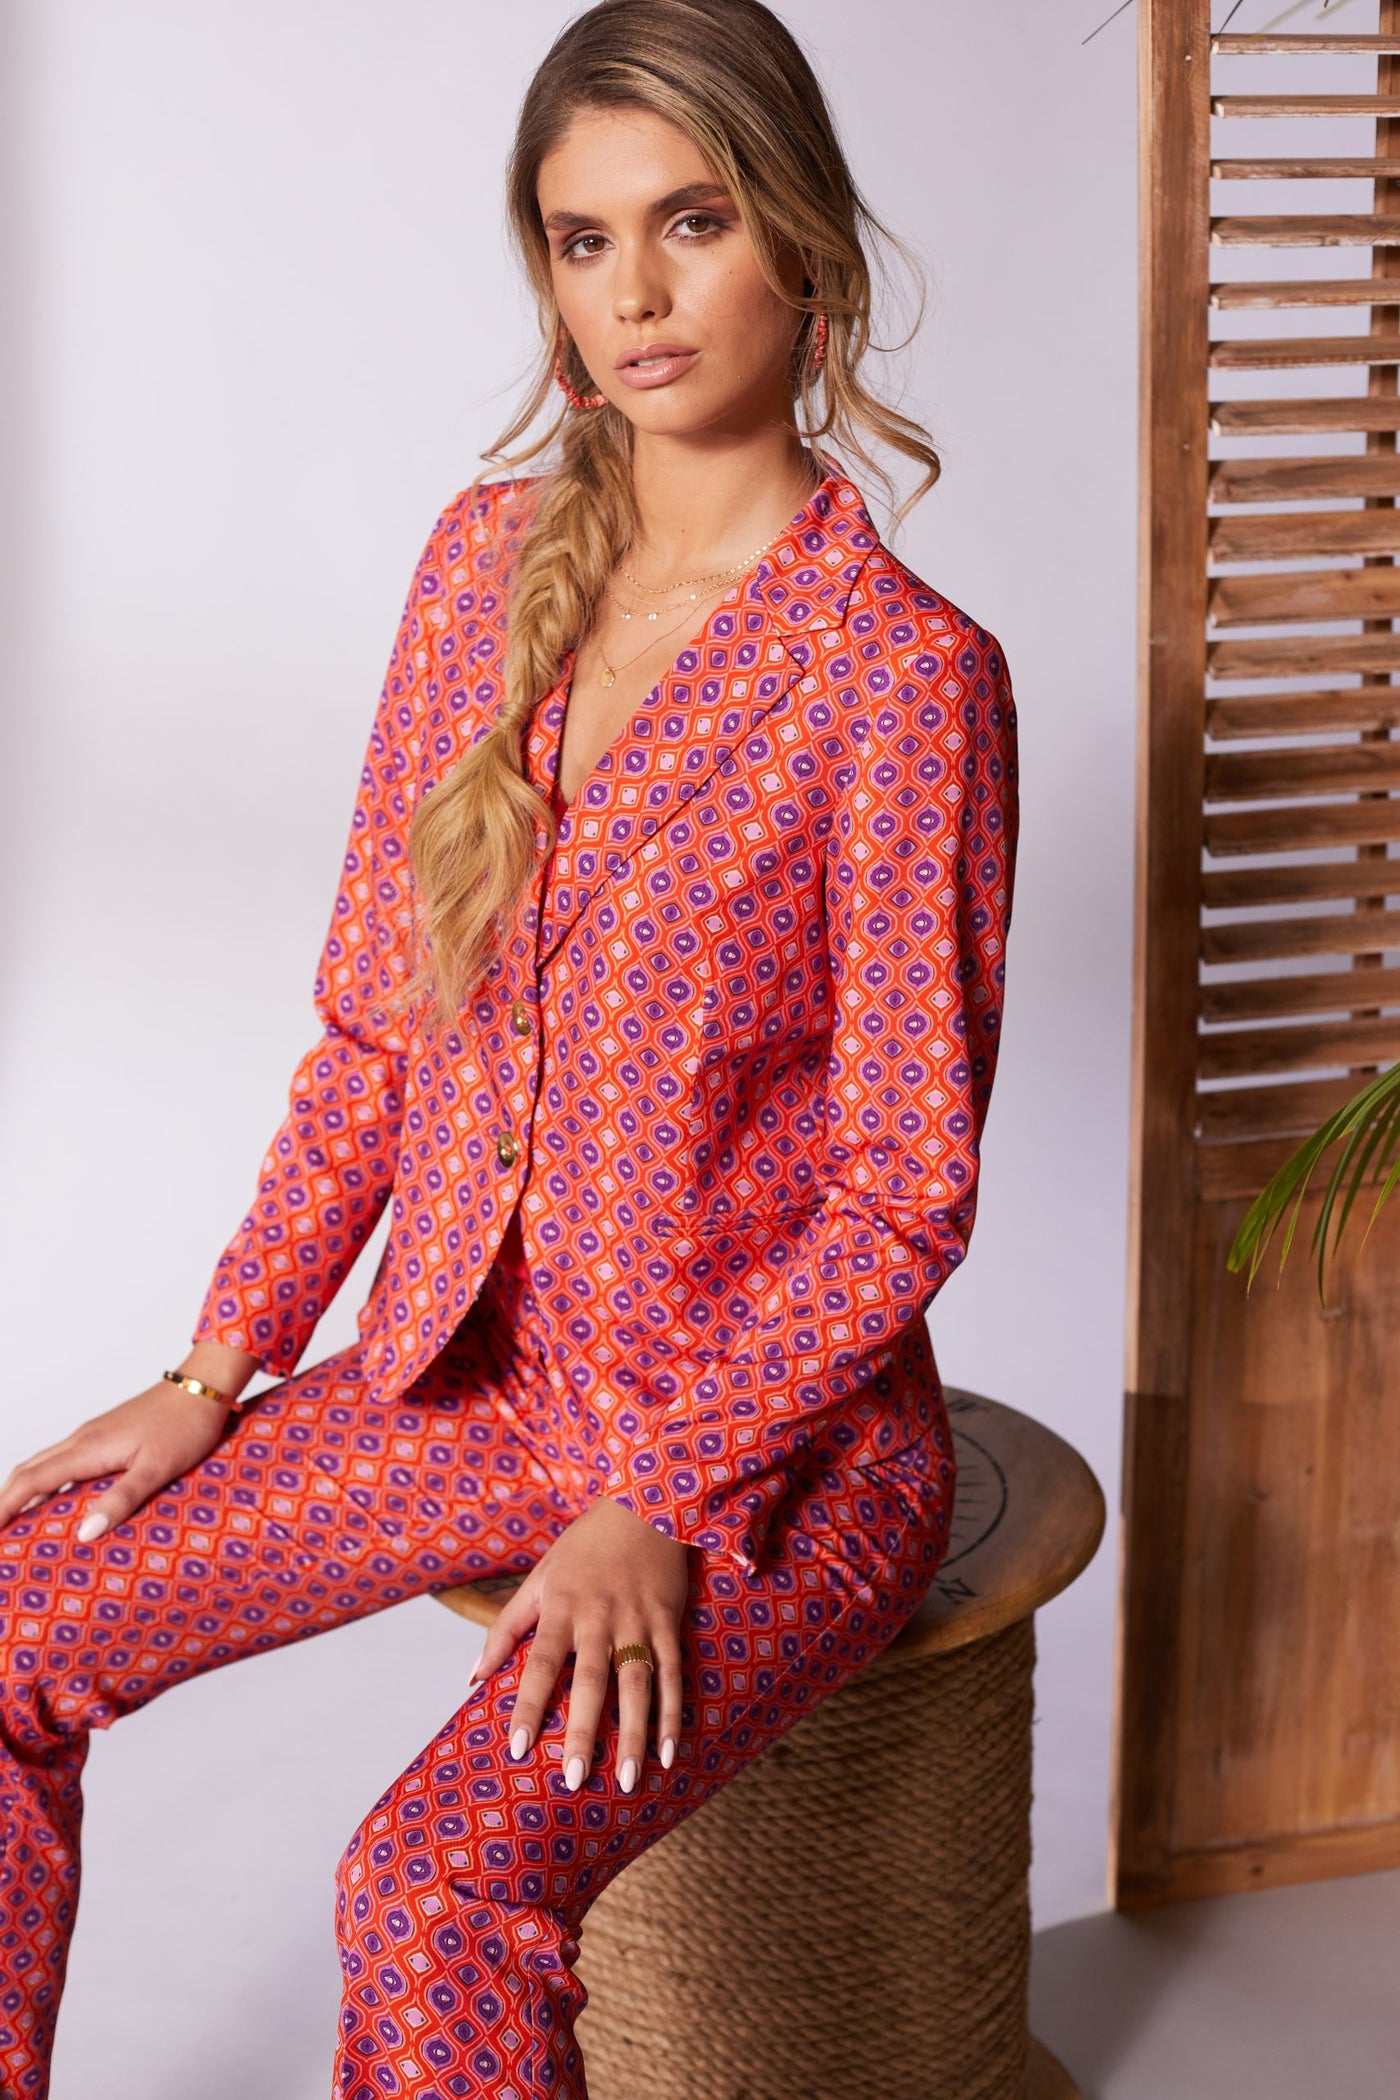 2 Piece Printed Trouser Suit With Gold Buttons